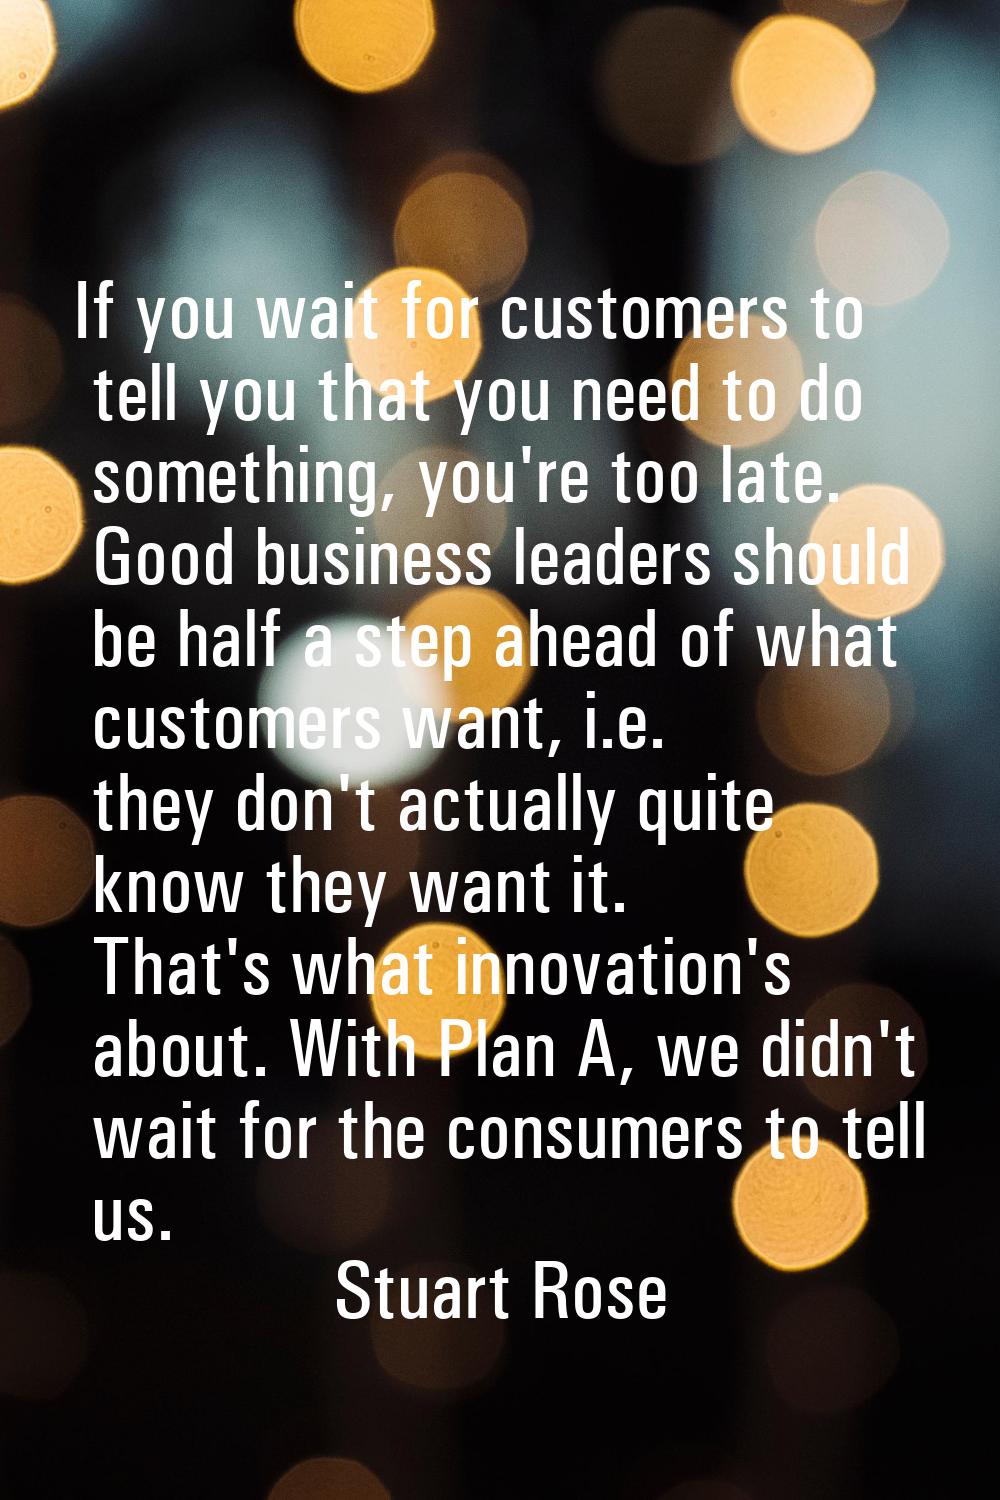 If you wait for customers to tell you that you need to do something, you're too late. Good business